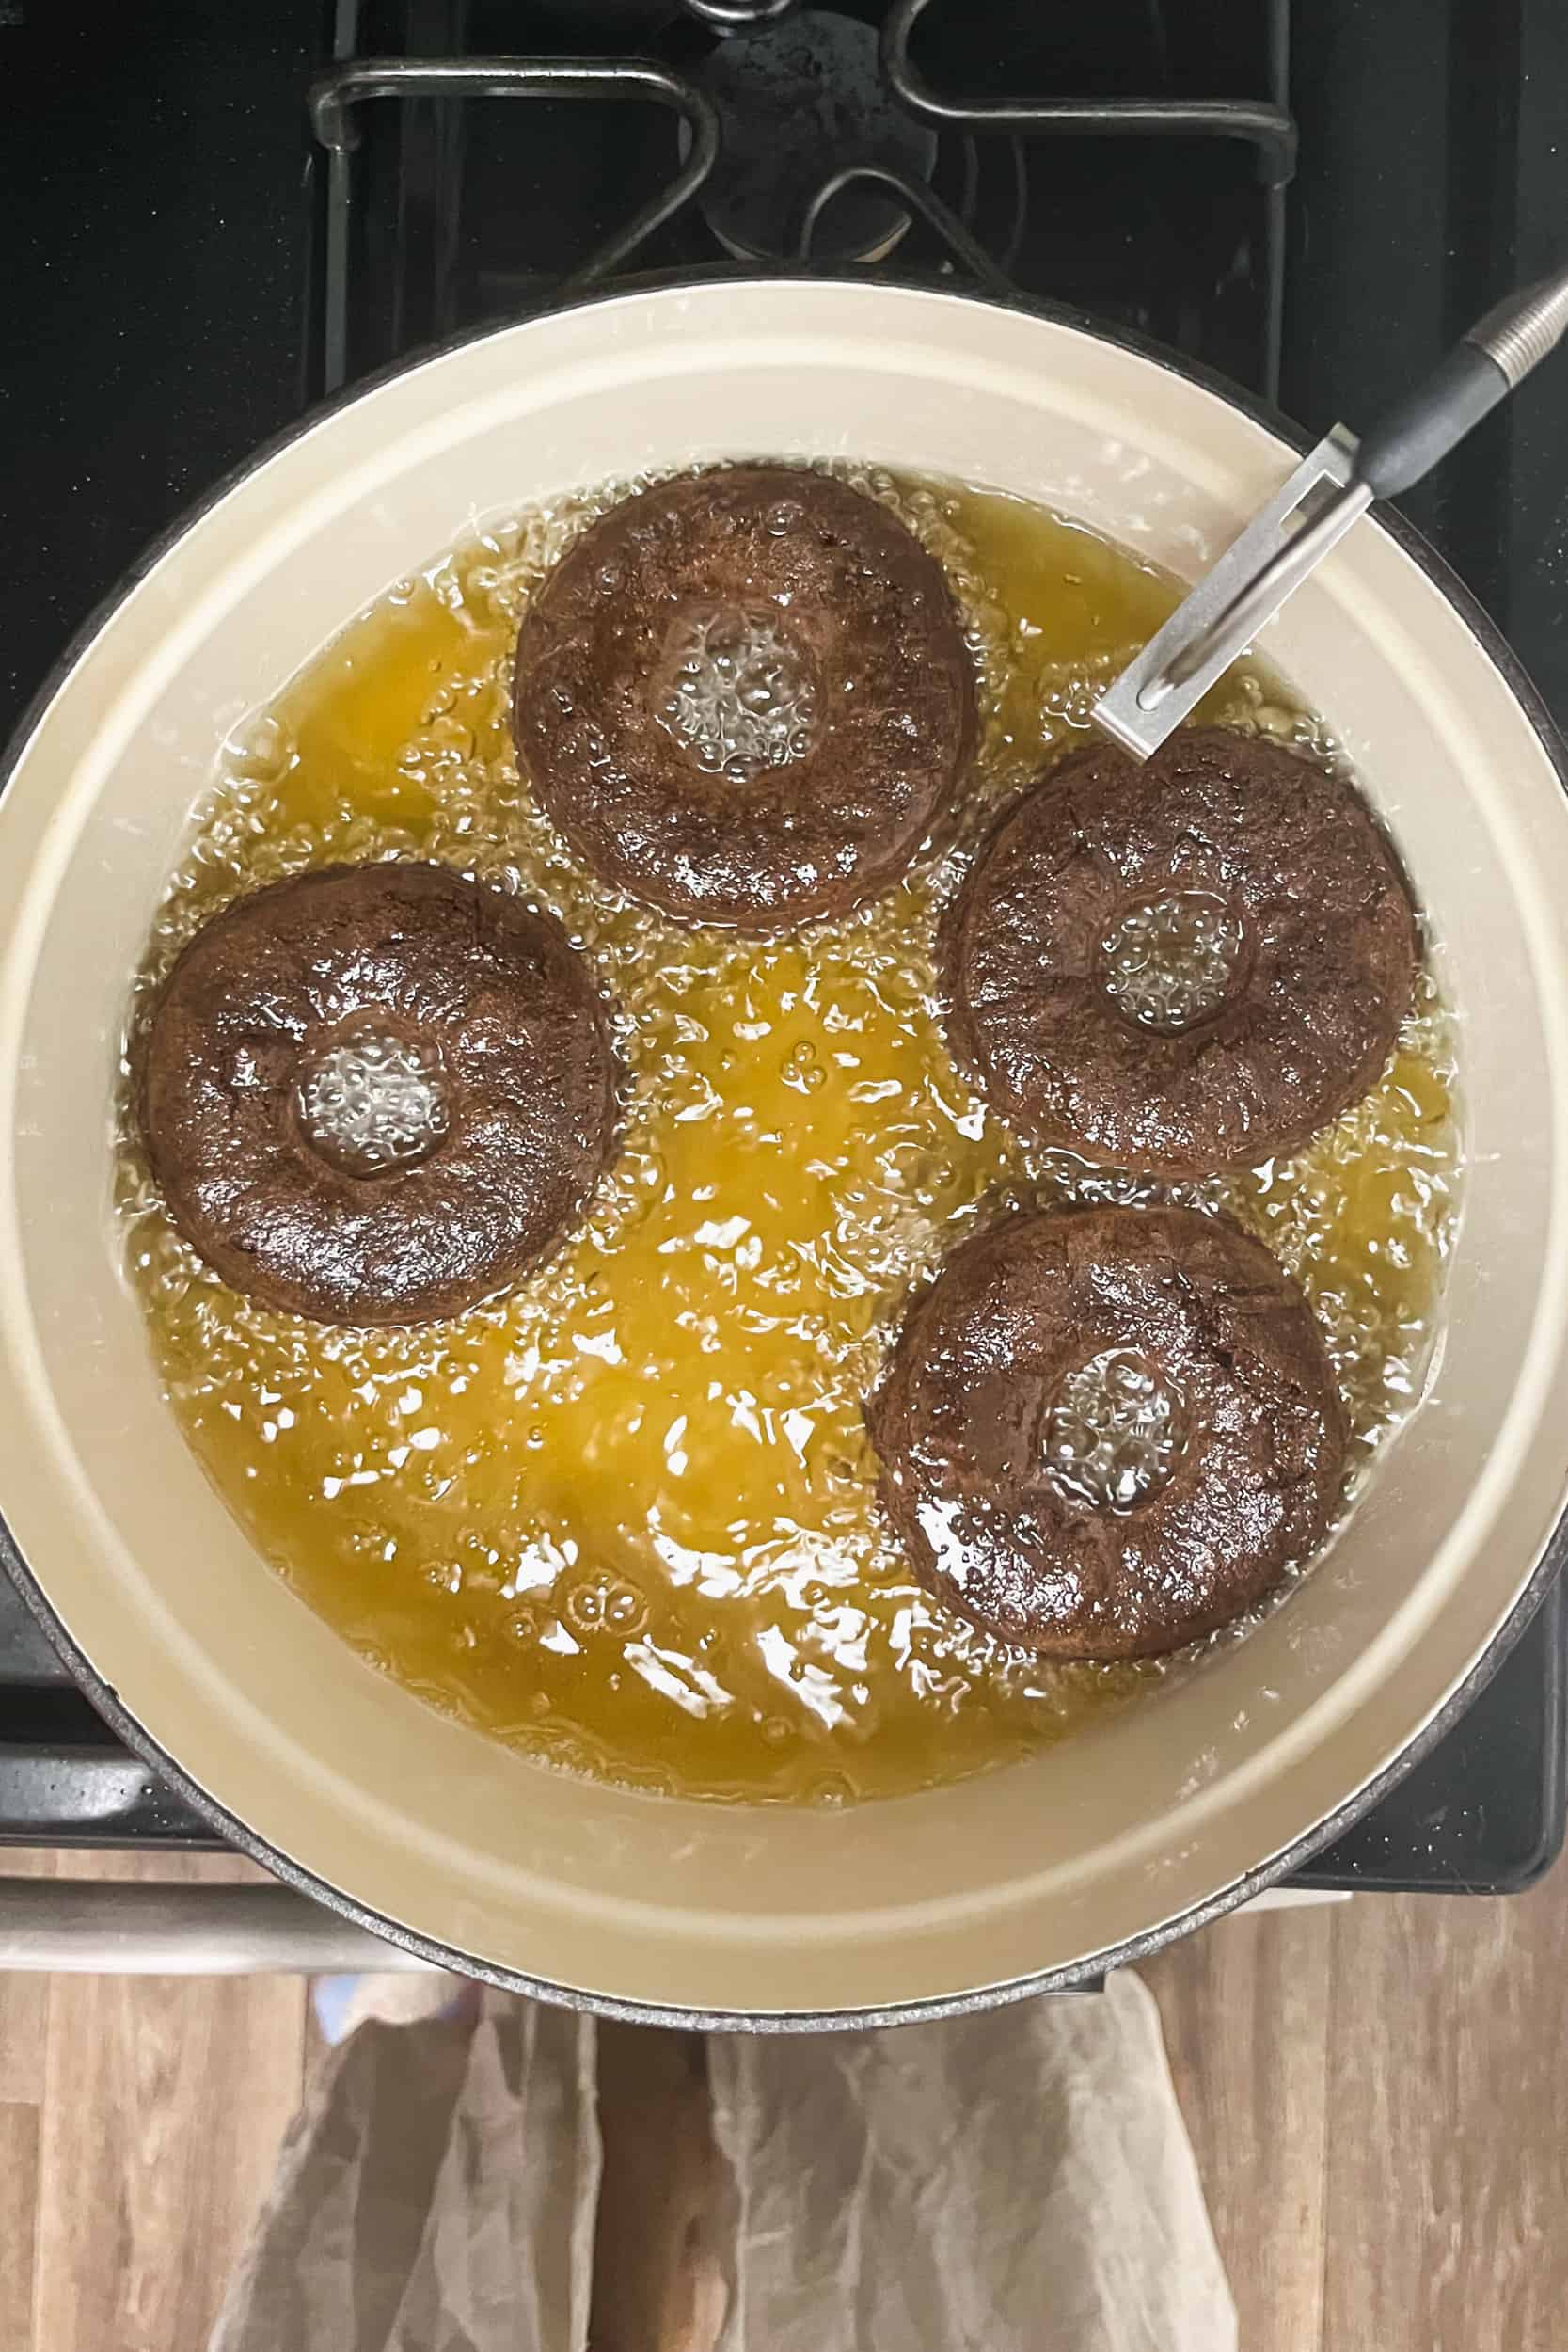 4 chocolate cake donuts floating in a pot of oil on the stove for deep frying